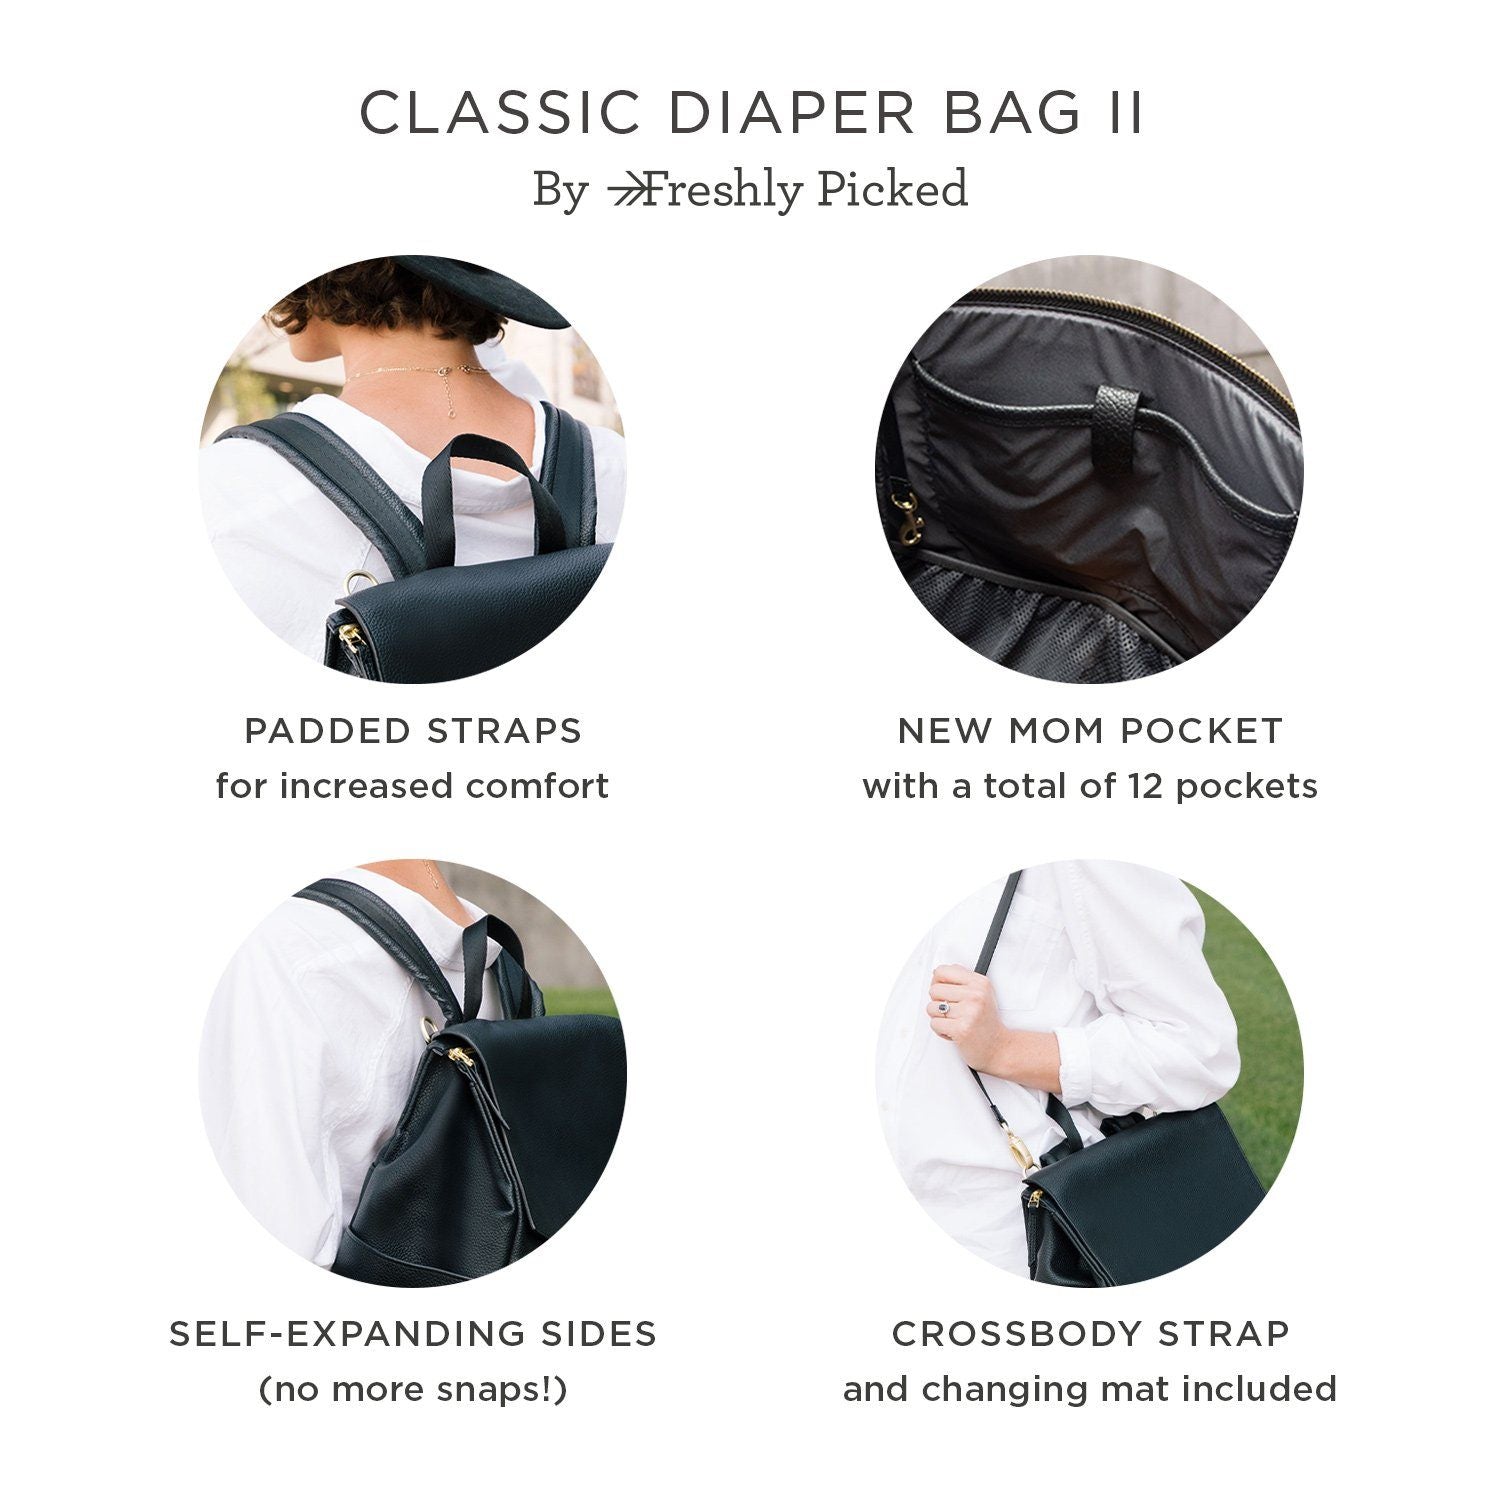 Fawn Design vs Freshly Picked Diaper Bag - arinsolangeathome